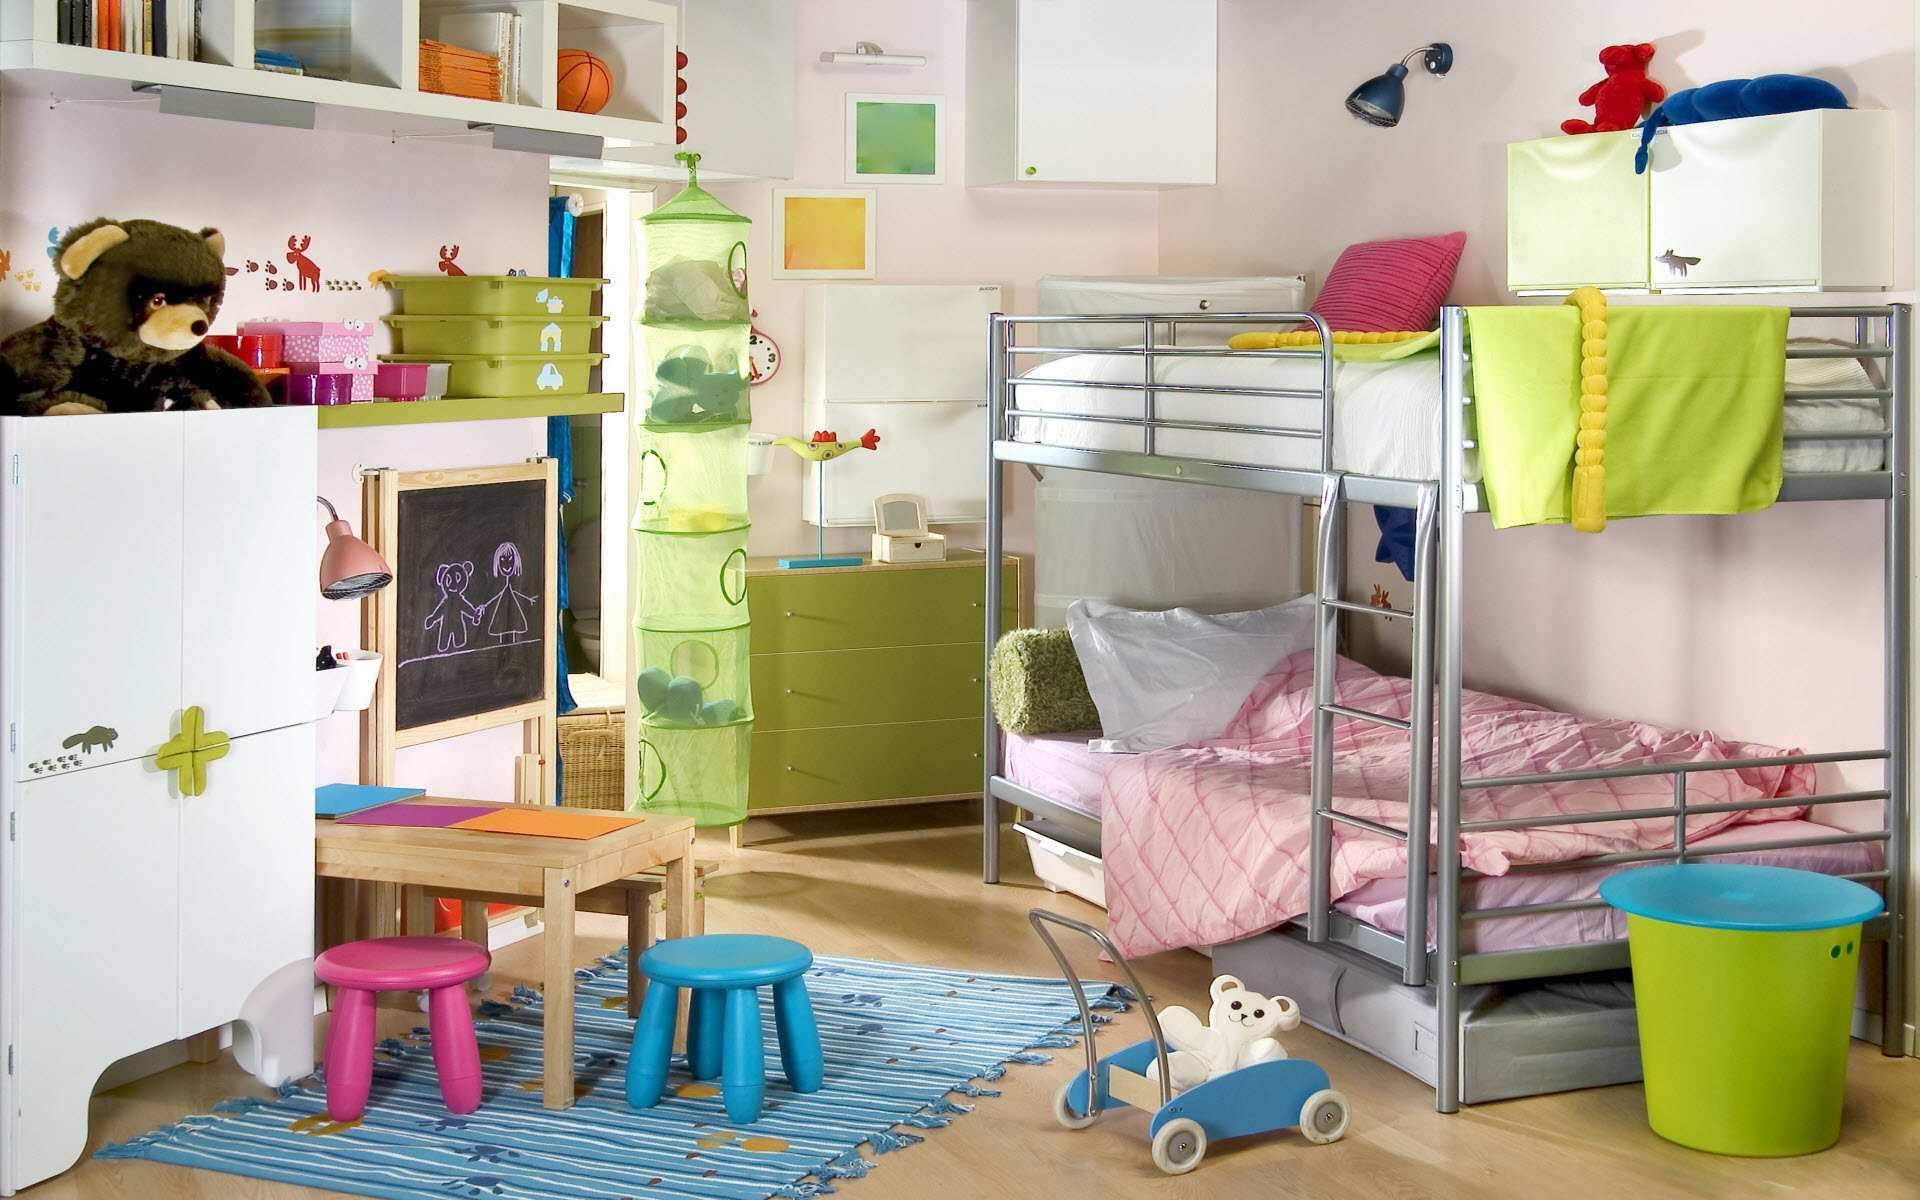 Kid Room Twin Outstanding Kid Room Ideas With Twin Bunk Bed Furnished With Cupboards And Wall Cabinets Plus Completed With Wooden Desk And Tiny Chairs On Blue Rug 15 Trendy Kids Room Ideas For The Bold Modern Home